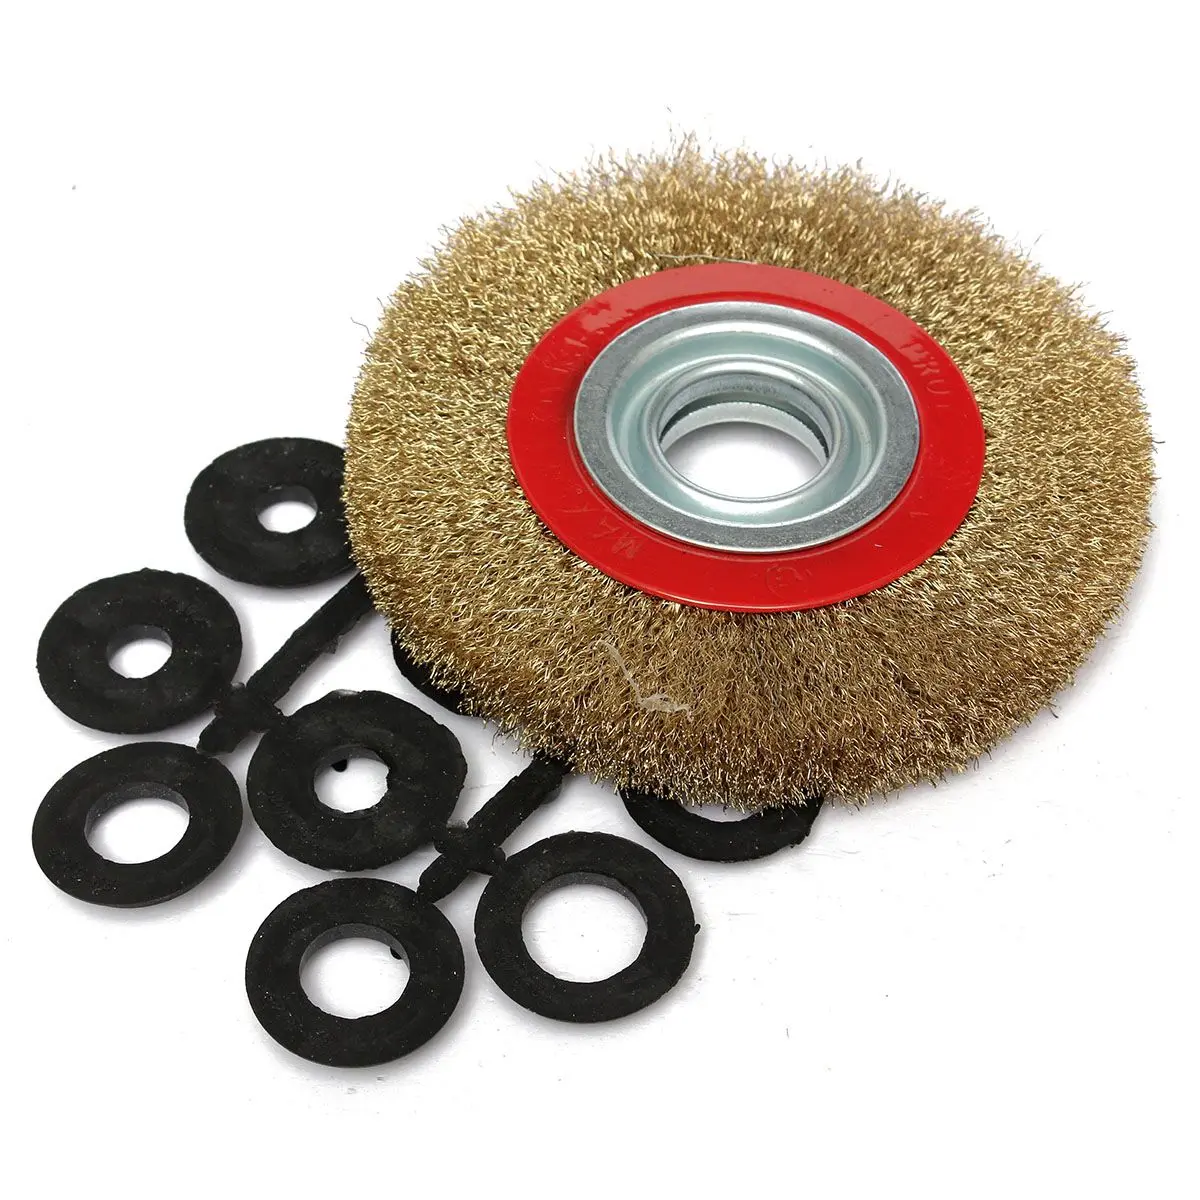 

6" Wire Brush 150mm Fine Wire Brush Wheel With 10pcs Adaptor Rings For Bench Grinder For Deburring Easy To Use Durable In Use